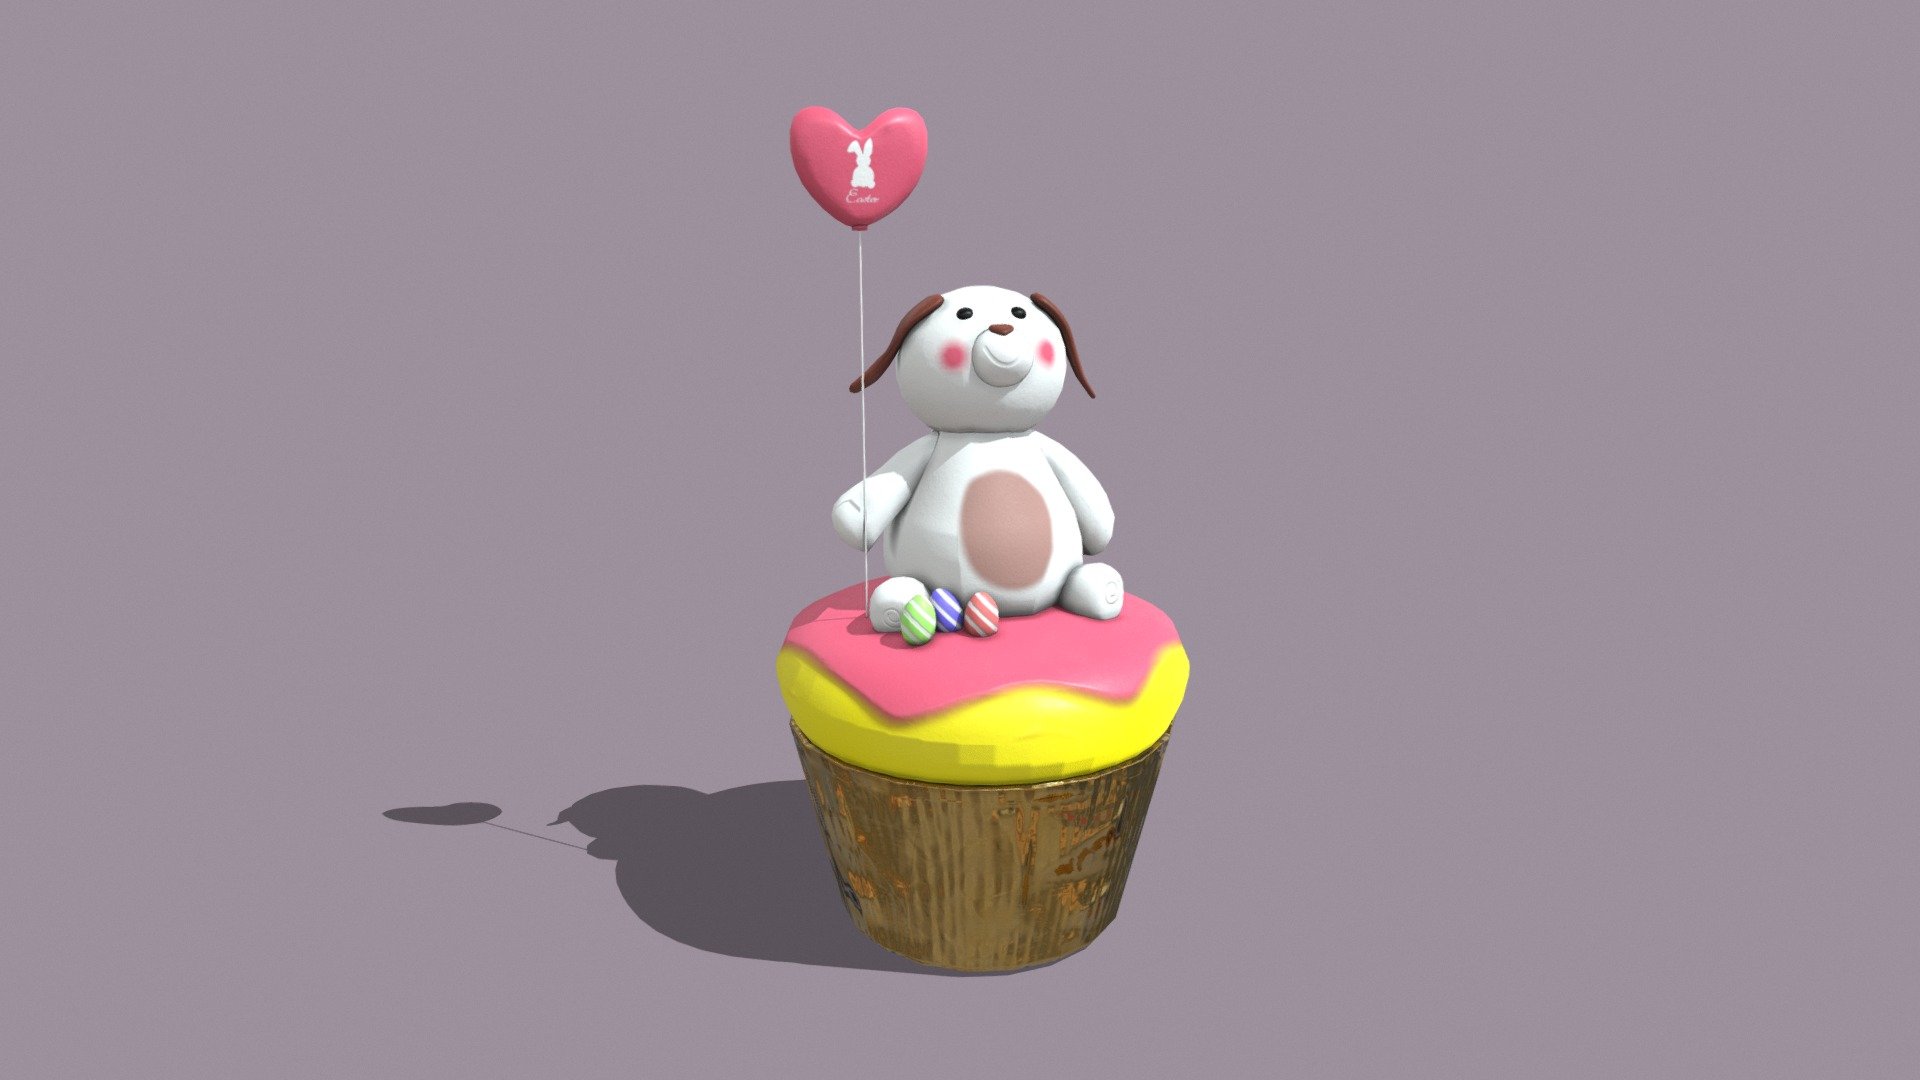 Bunny_With_Heart_Balloon_Cup_Cake_FBX
VR / AR / Low-poly
PBRapproved
GeometryPolygon mesh
Polygons2,926
Vertices2,996
Textures PNG 4K - Bunny_With_Heart_Balloon_Cup_Cake_FBX - Buy Royalty Free 3D model by GetDeadEntertainment 3d model